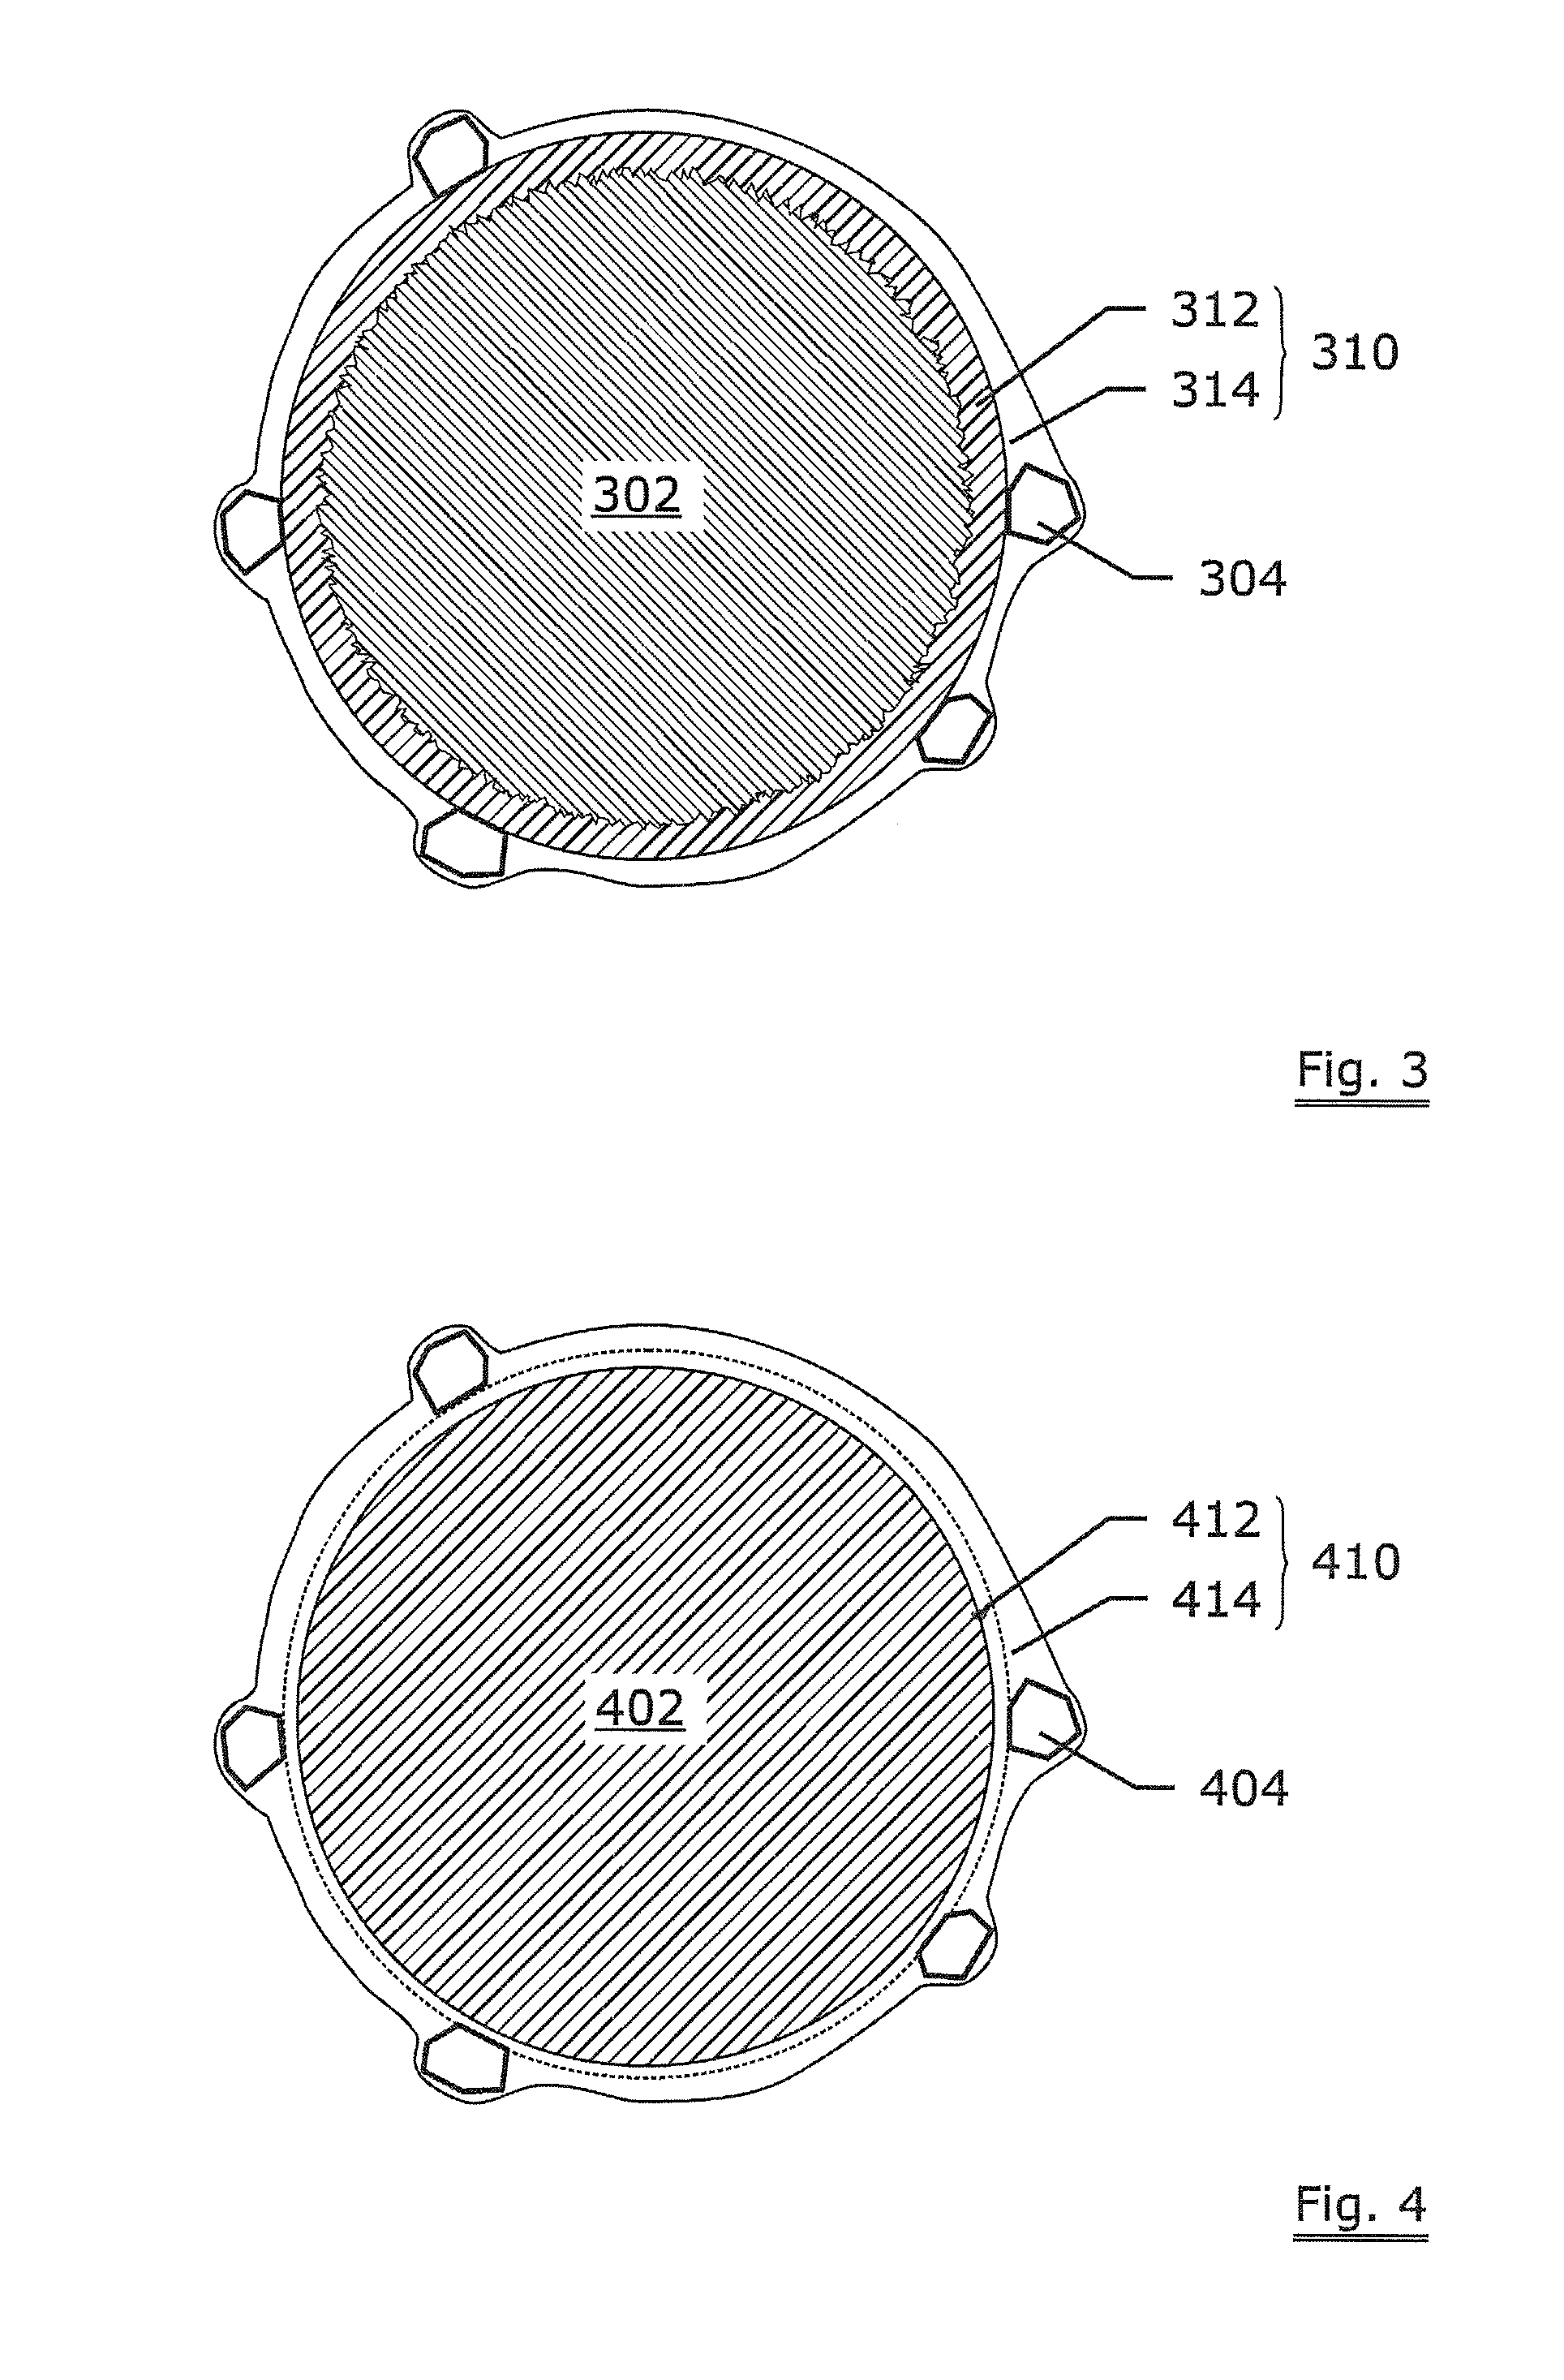 Fixed abrasive sawing wire with cubo-octahedral diamond particles